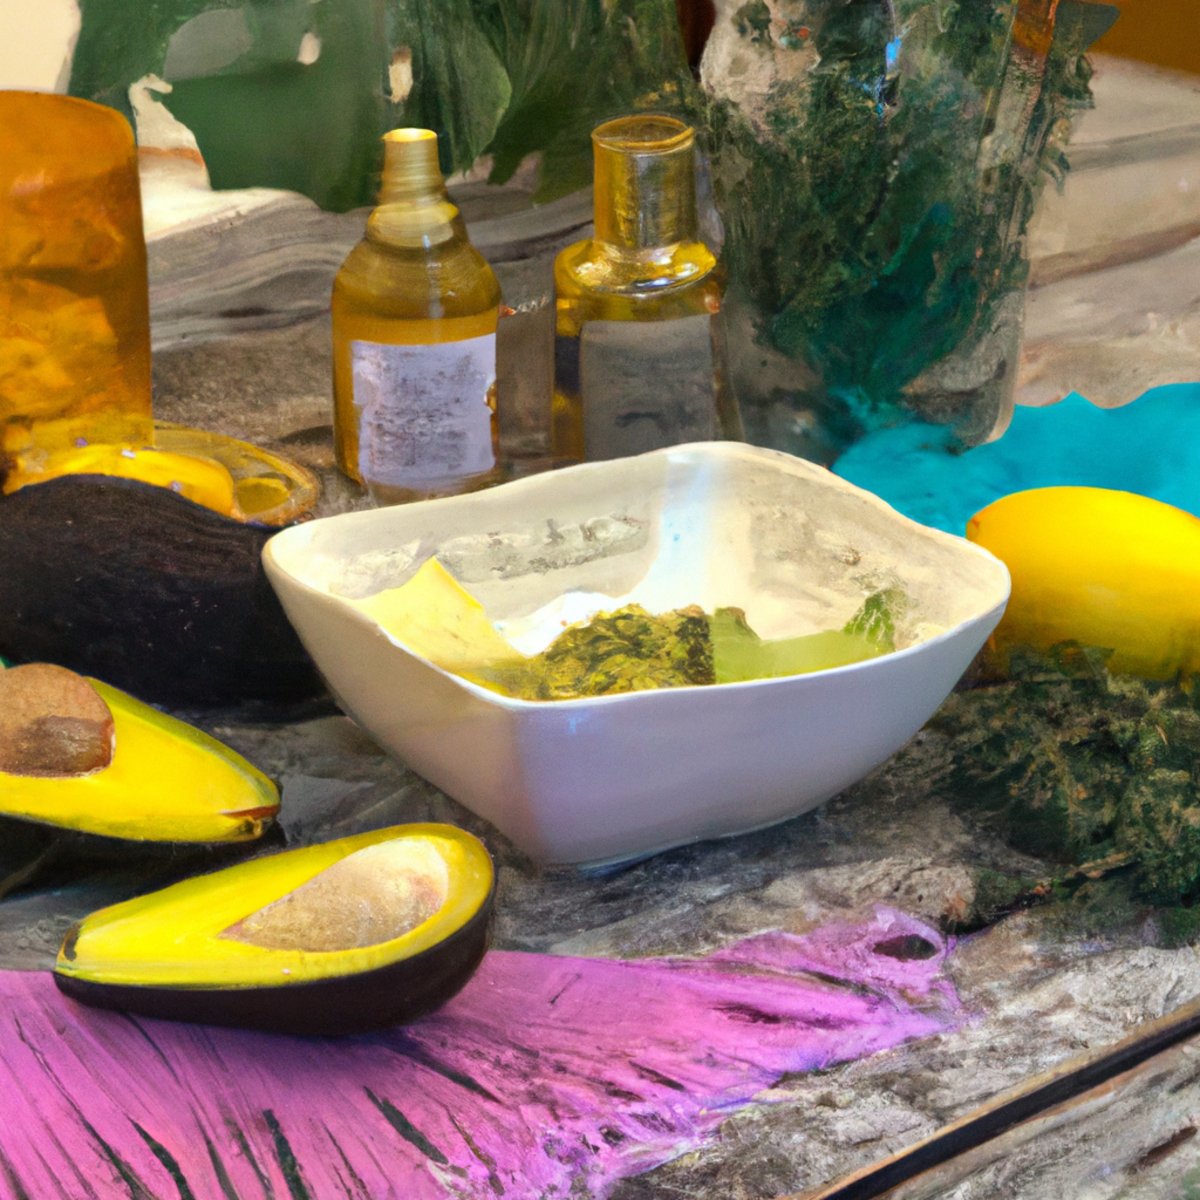 DIY face mask ingredients, tools, and lush greenery backdrop evoke freshness and rejuvenation -Natural beauty remedies